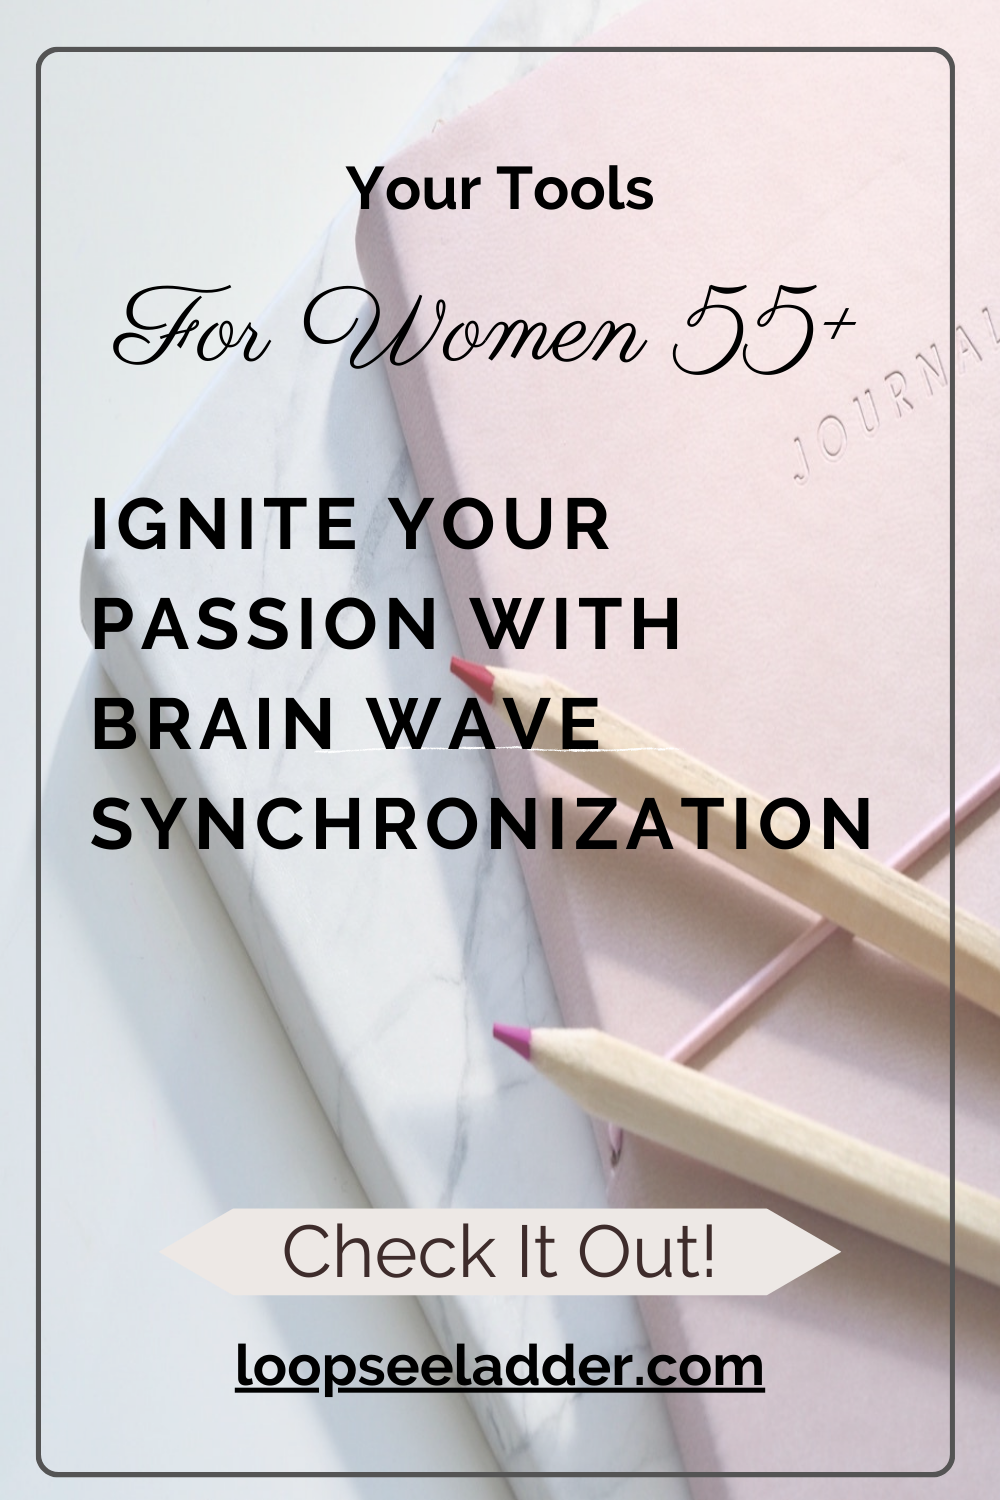 Ignite Your Passion: The Incredible Power of Synchronized Brain Waves for Women 55+